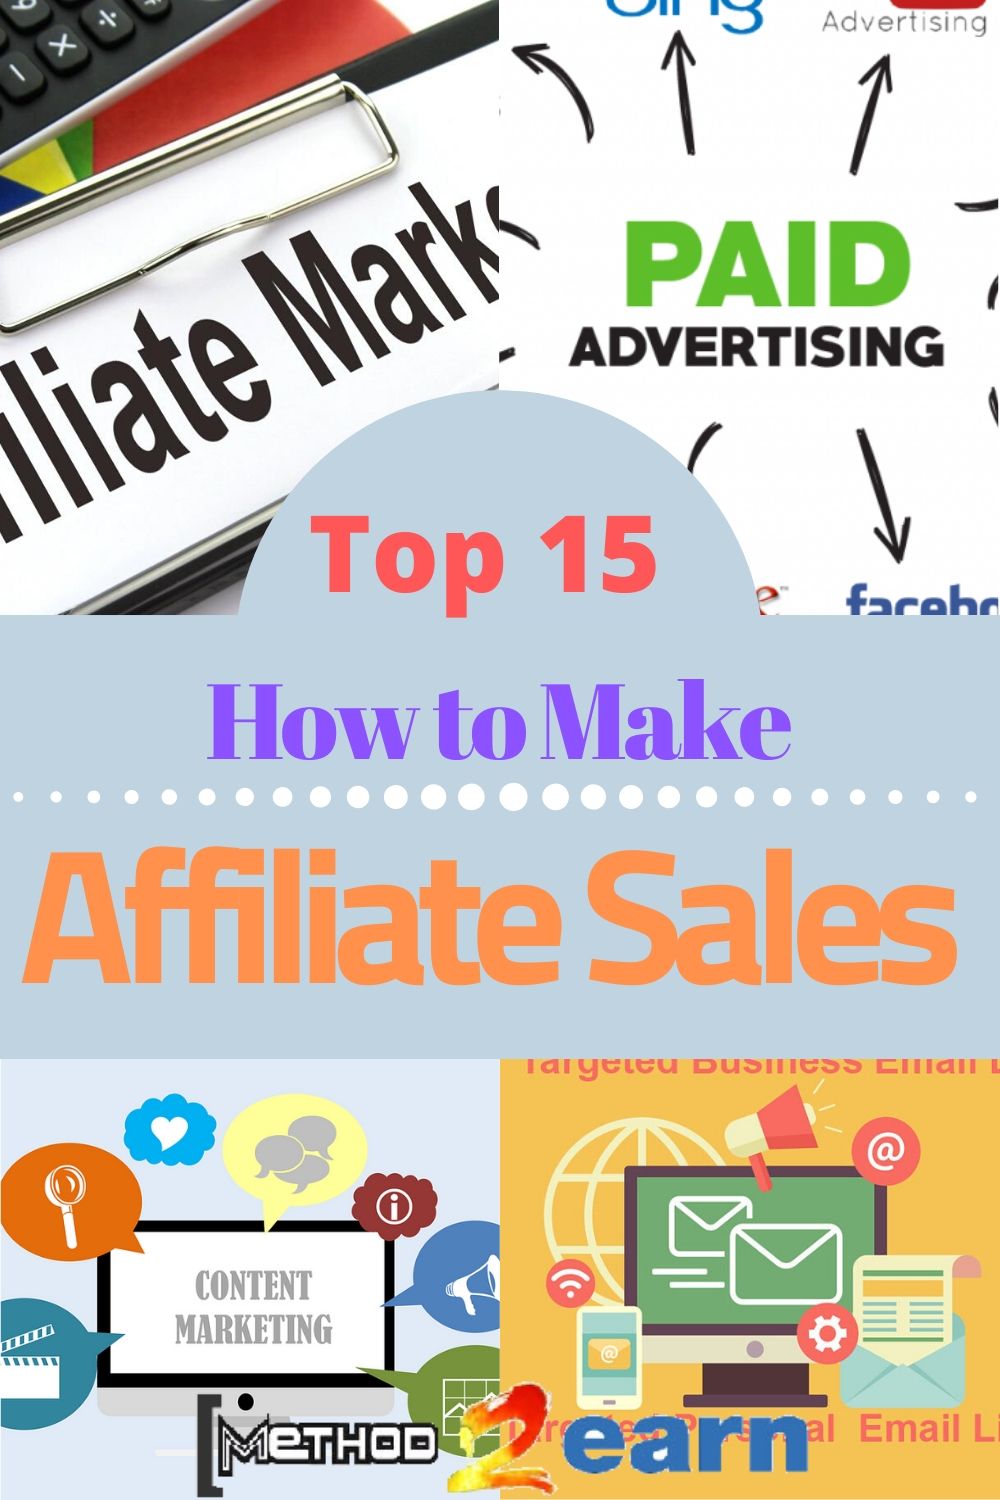 How to Make Affiliate Sales